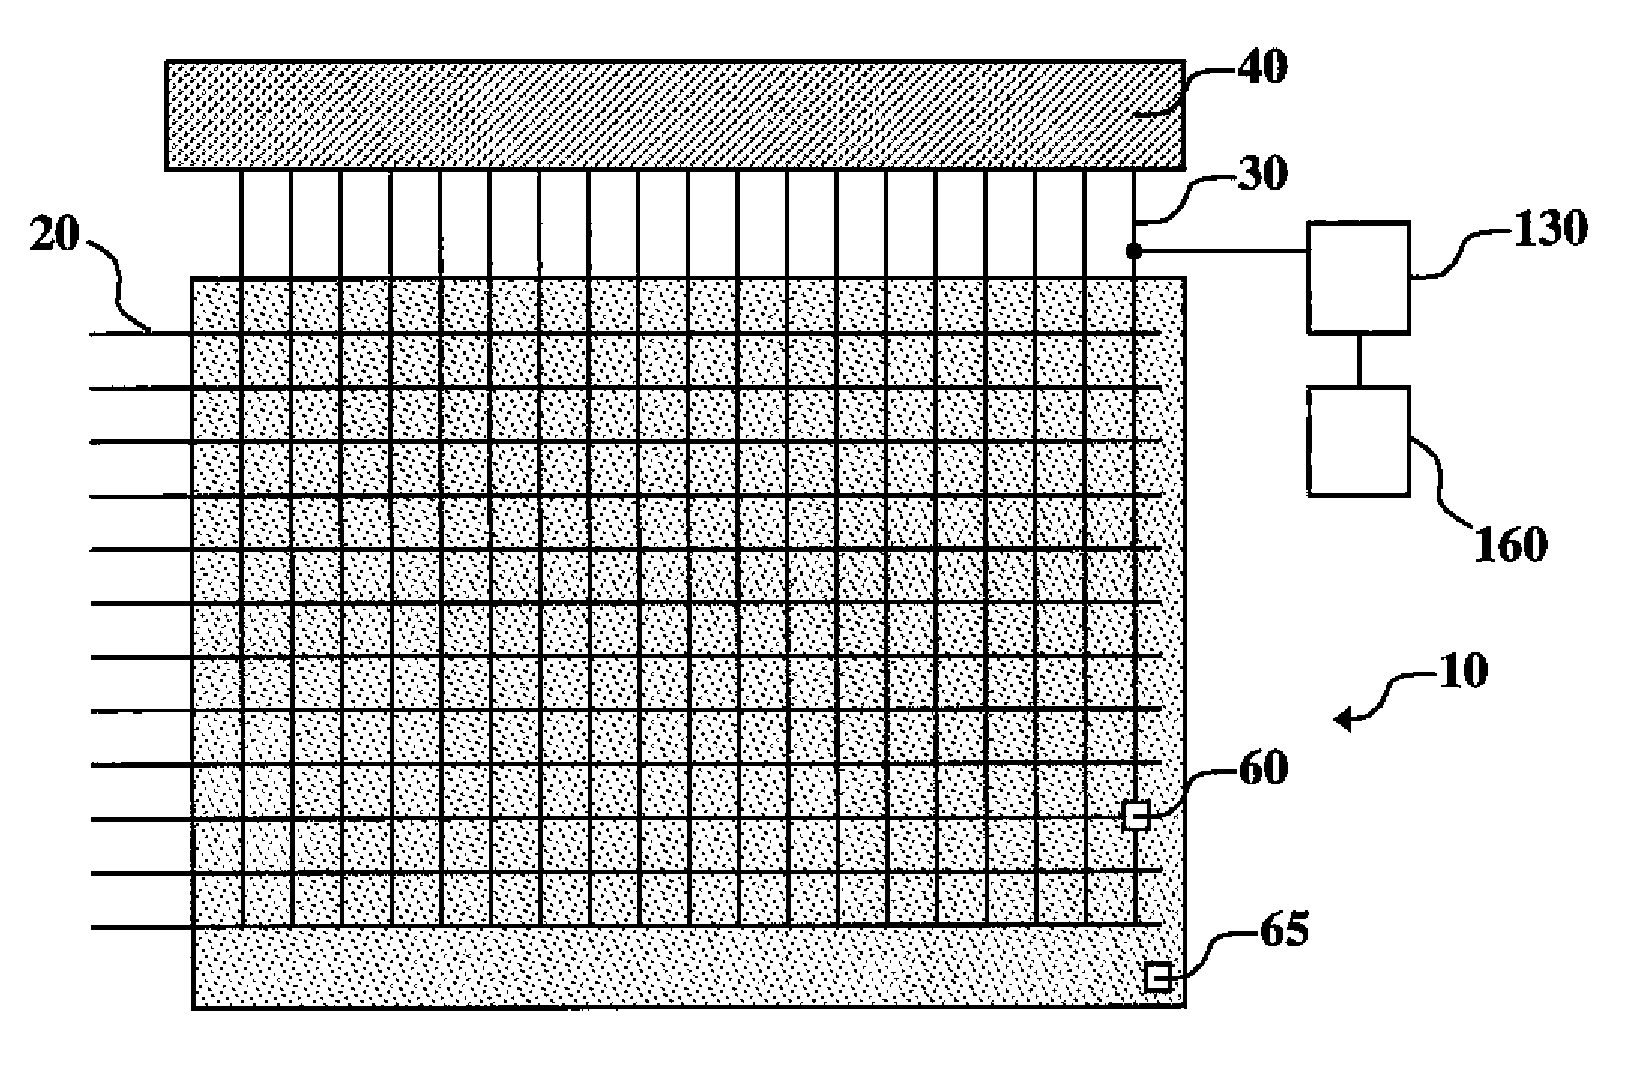 Digital-drive electroluminescent display with aging compensation